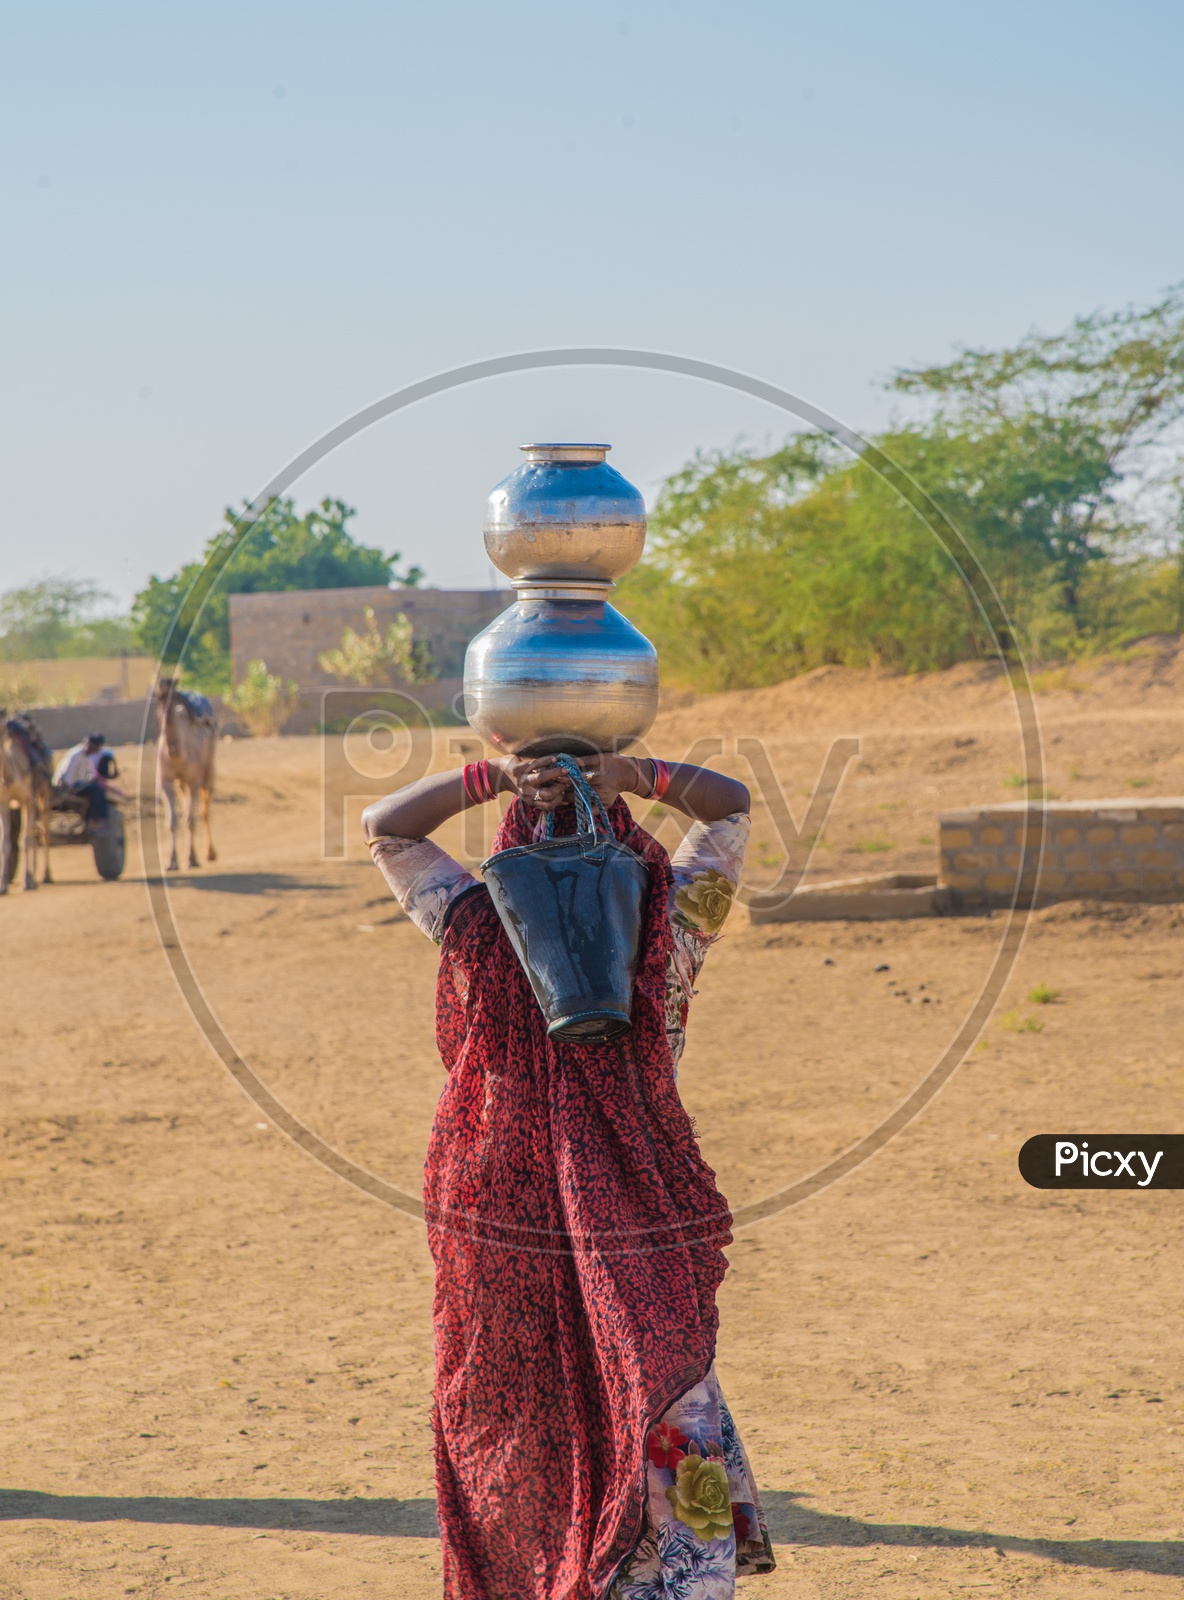 rajasthani Village woman carrying water pots on head